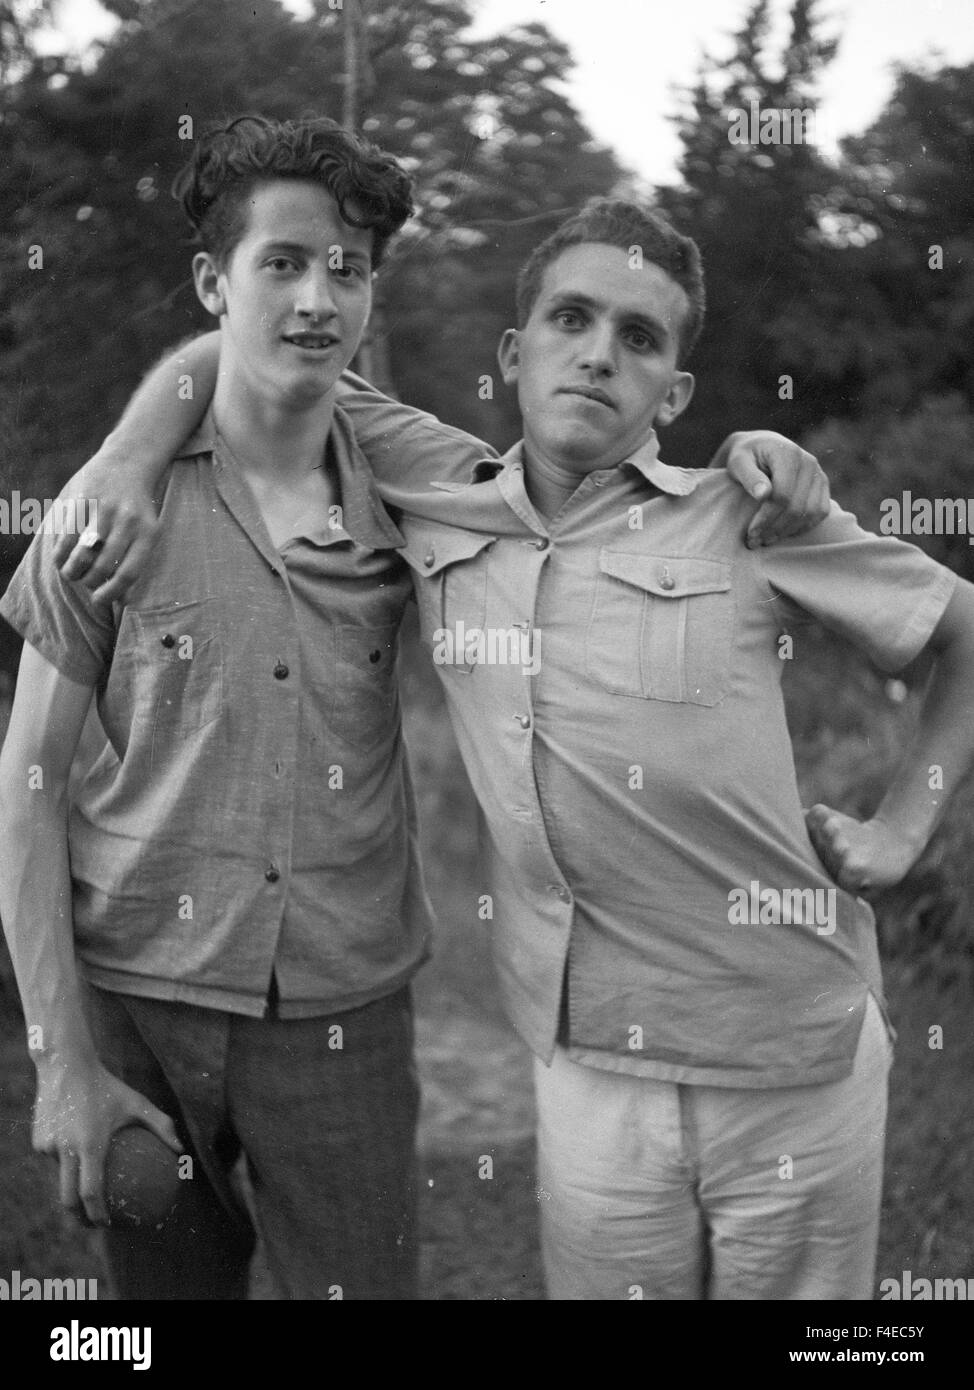 two young men posing for a portrait during 40s fashion shirts Stock Photo